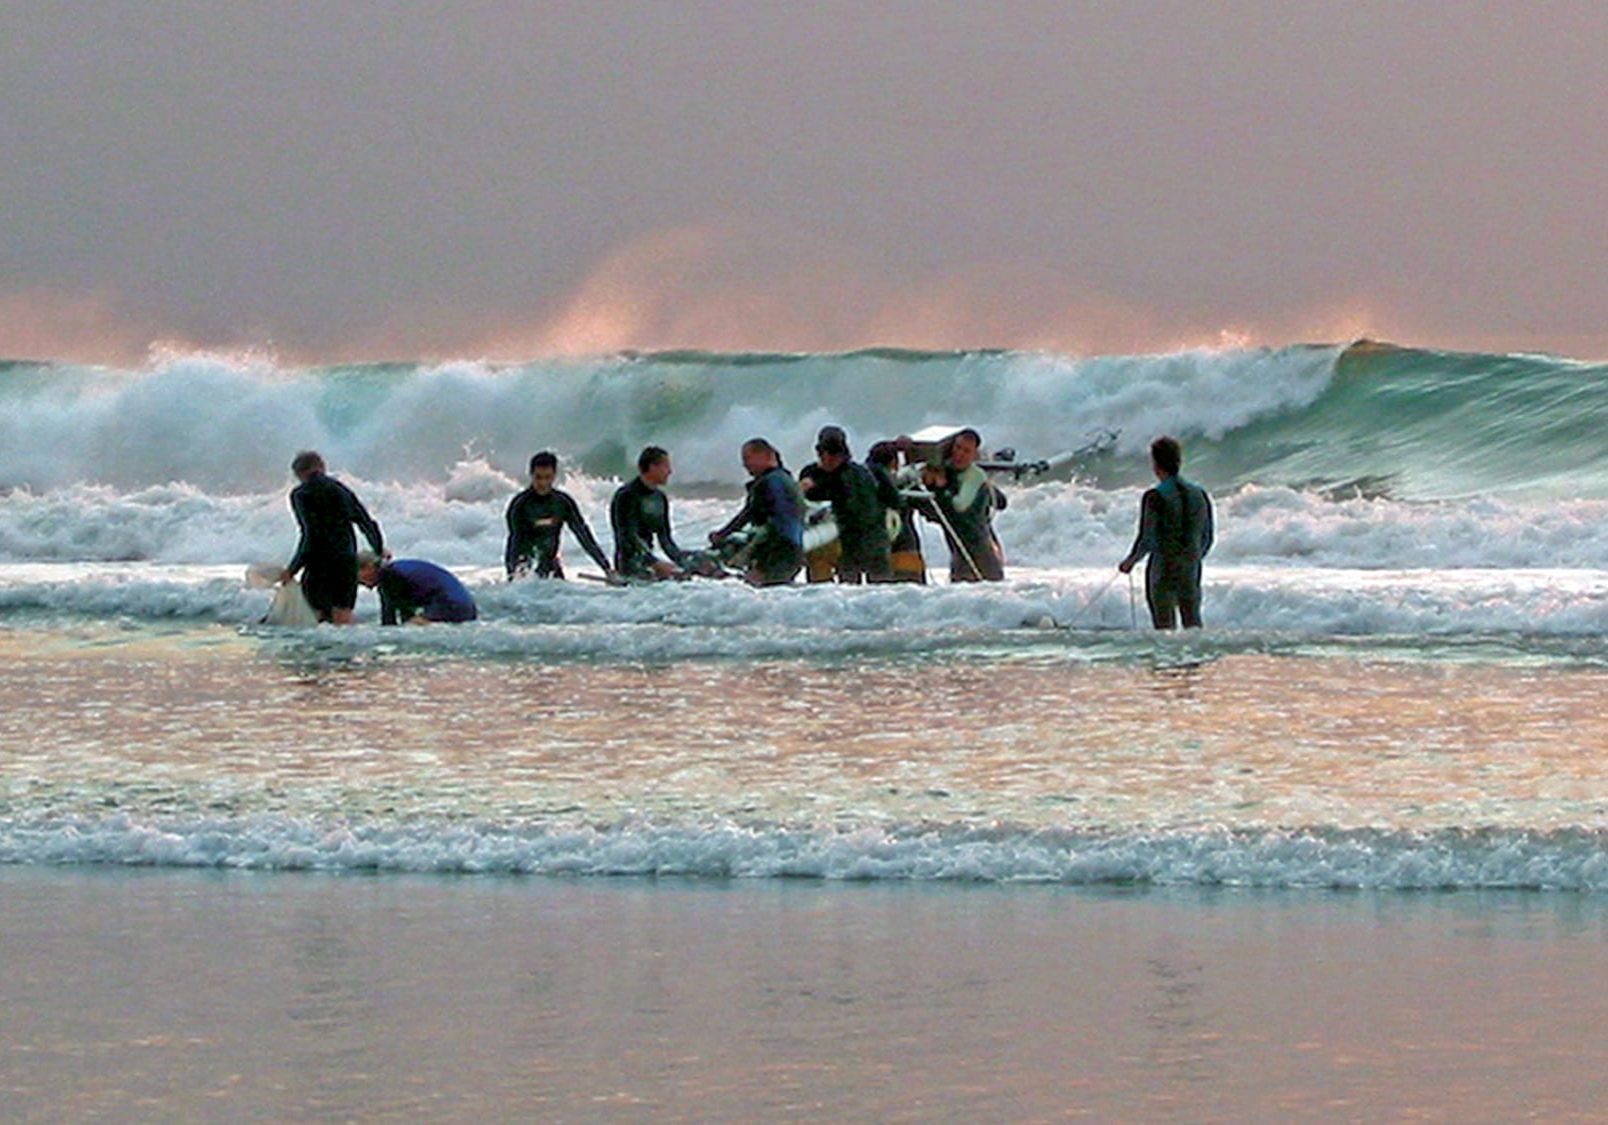 Researchers carry and instrument tower into the surf to measure the movement of water beneath the breaking waves.